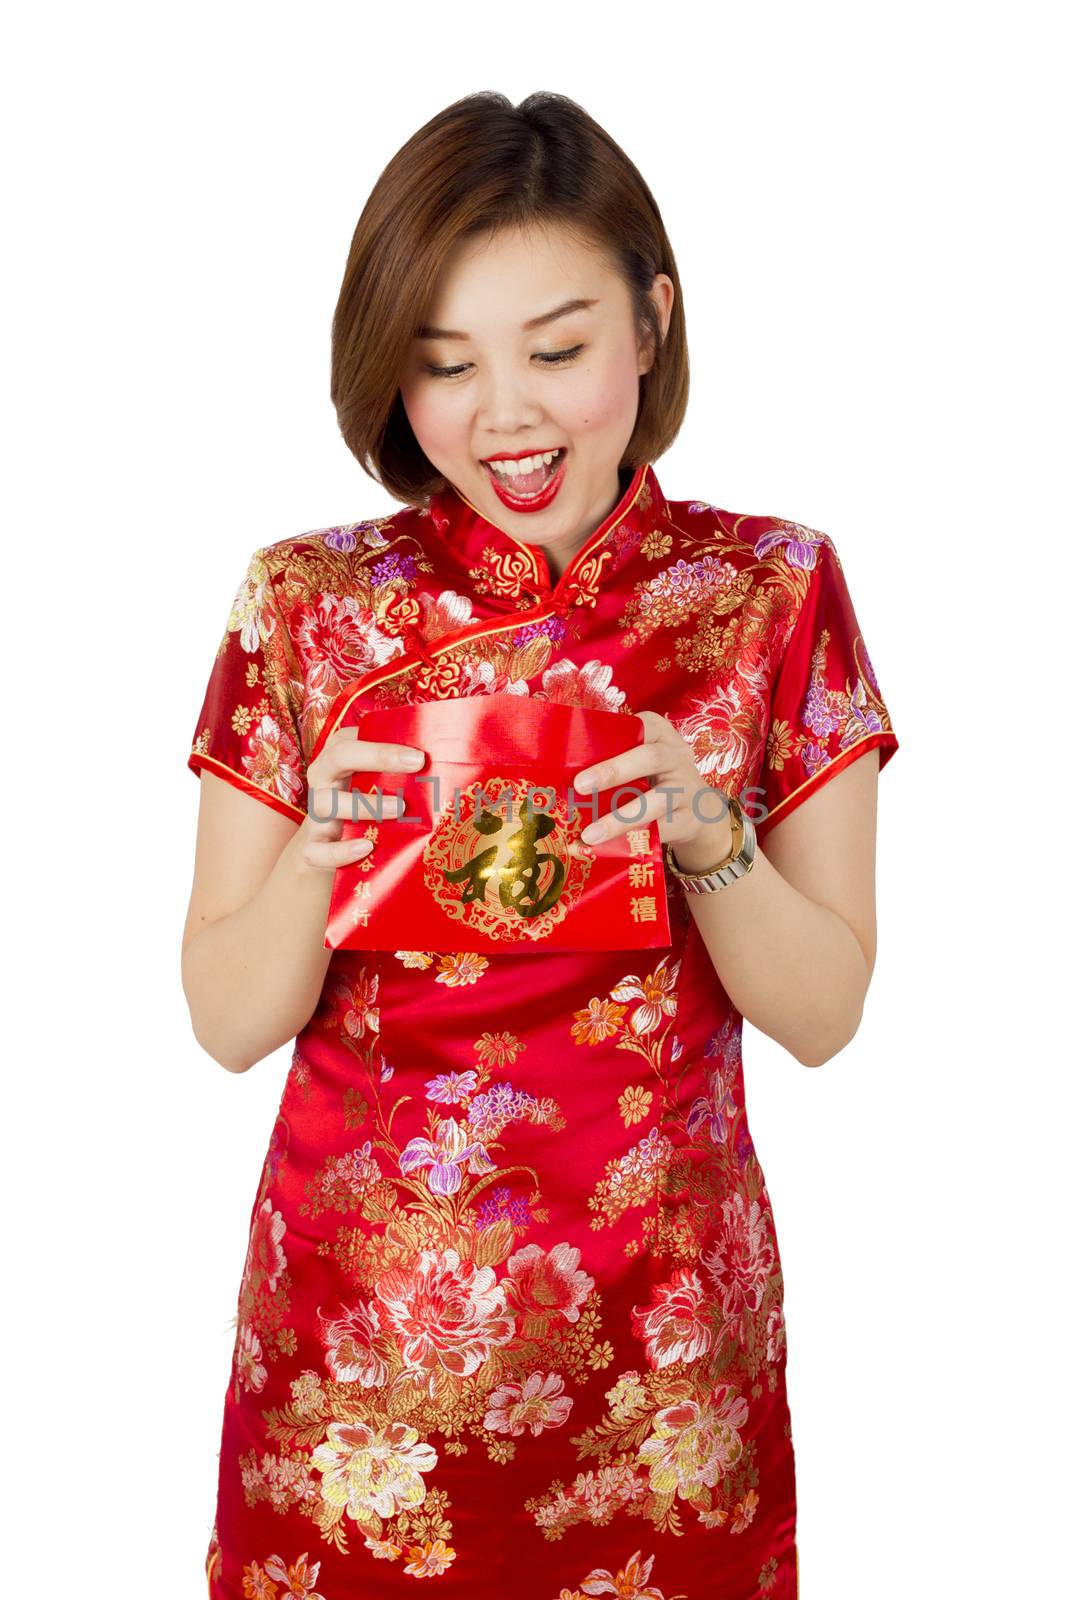 Asian girl got big surprise holding ung-pao or red porcket gift on isolated whith background.